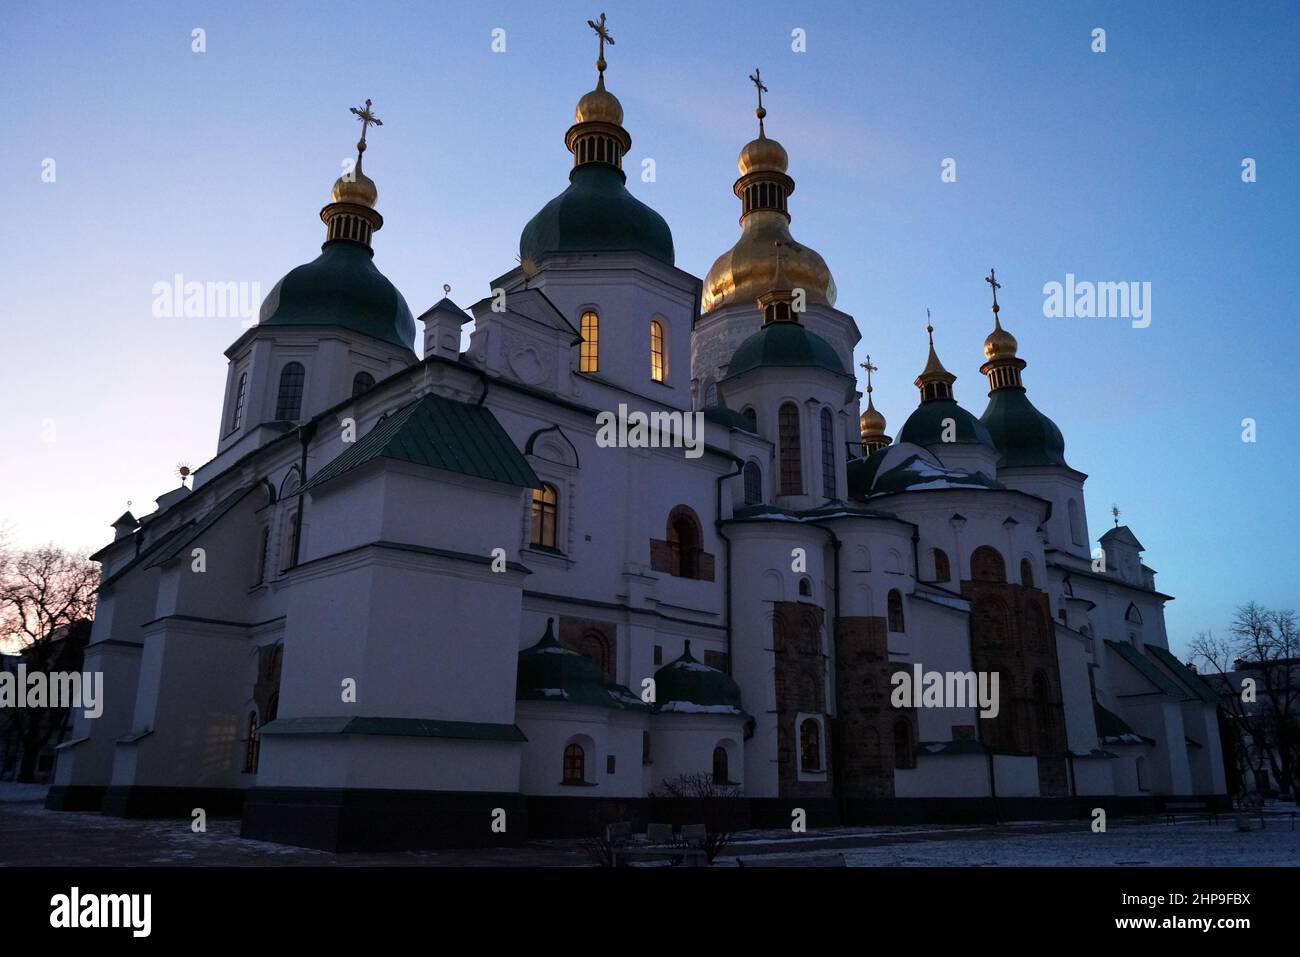 Saint Sophia Cathedral, architectural and religious monument, built 11th century, view at dusk in early evening, Kyiv, Ukraine Stock Photo